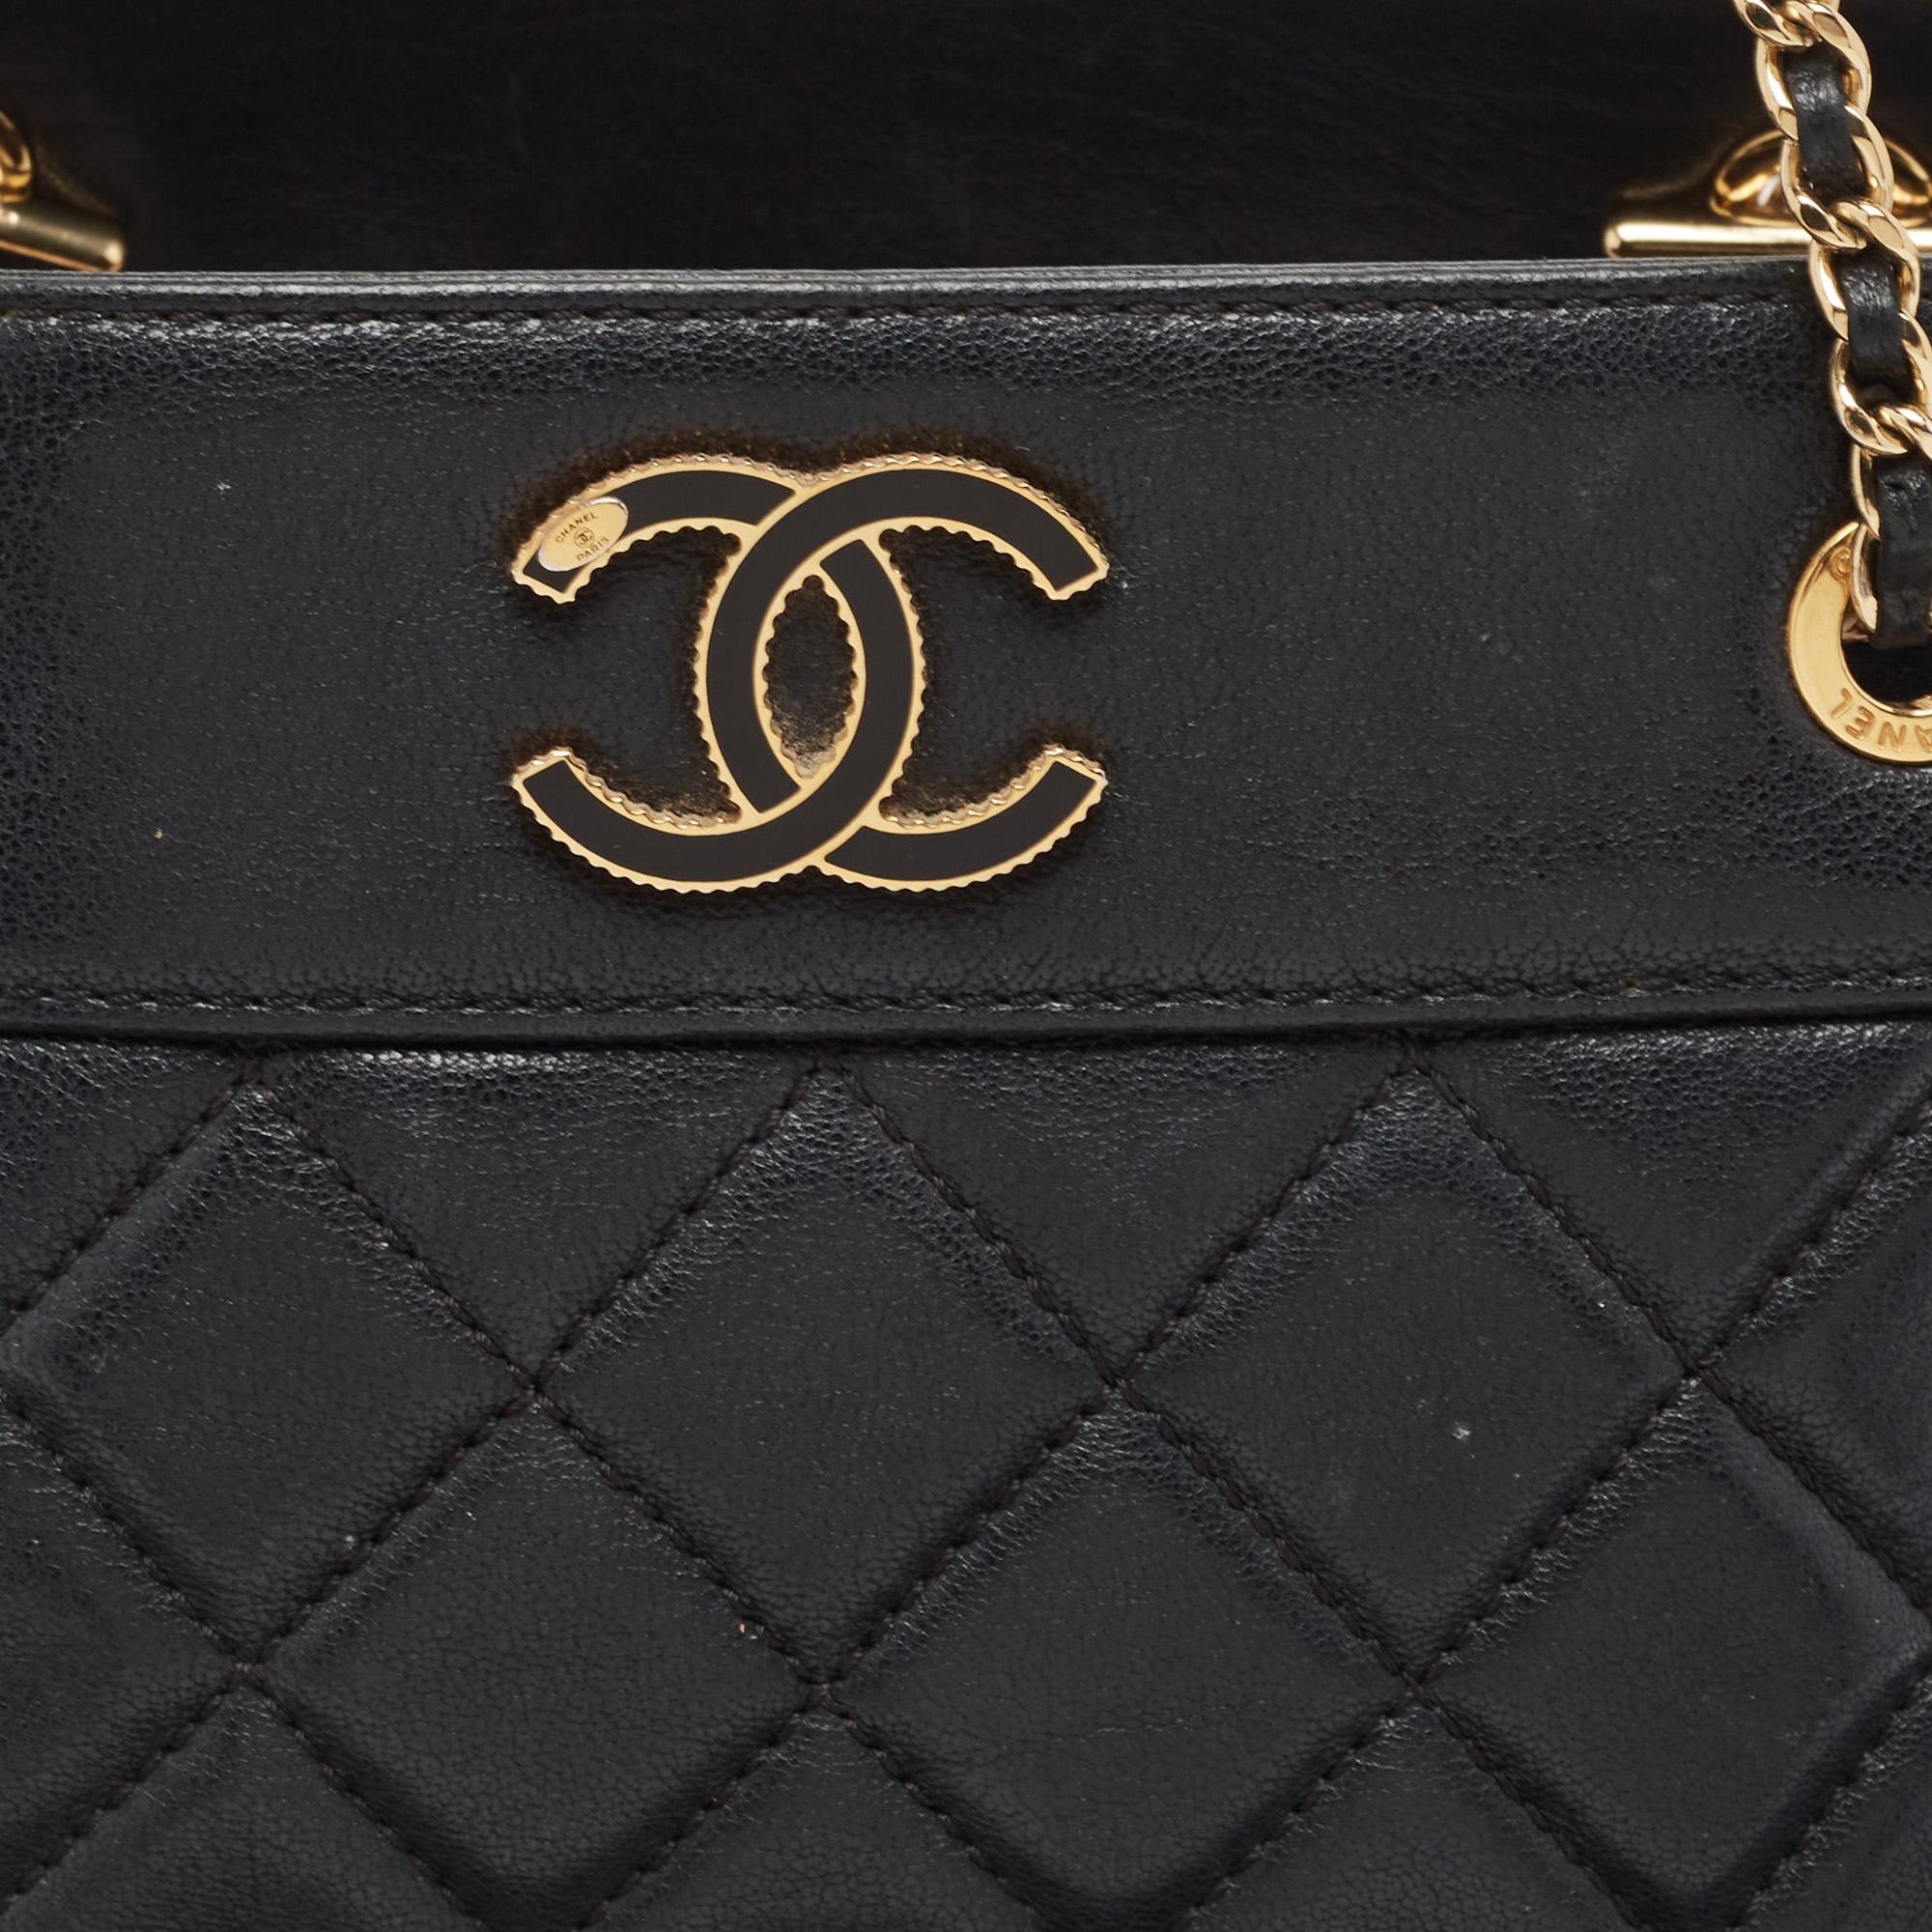 Chanel Black Quilted Leather CC Chain Tote